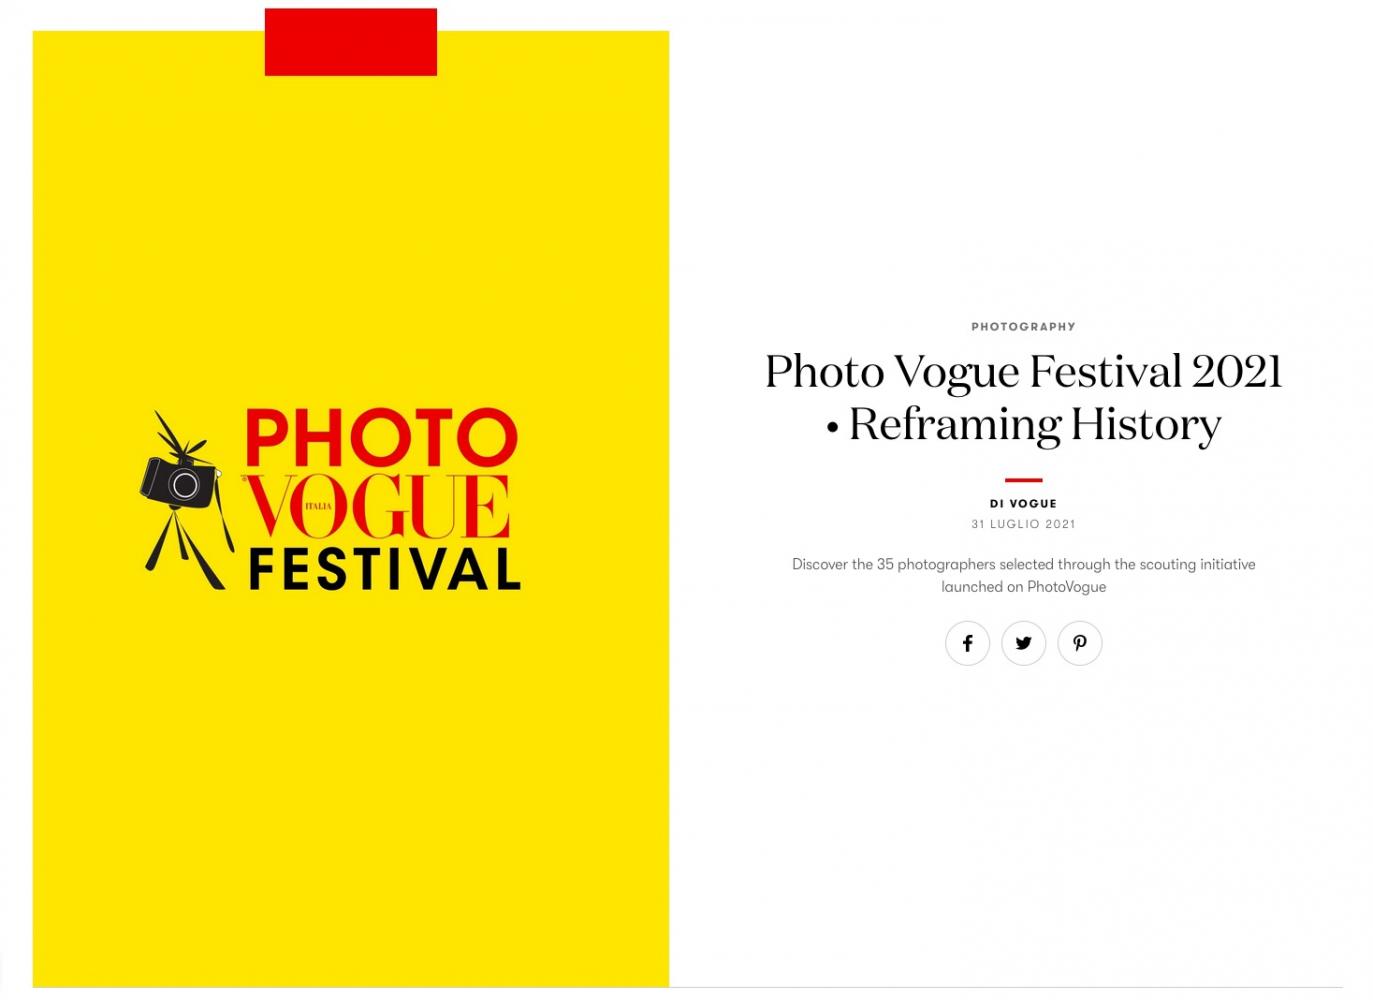 Selected for Photo Vogue Festival 2021 "¢ Reframing History